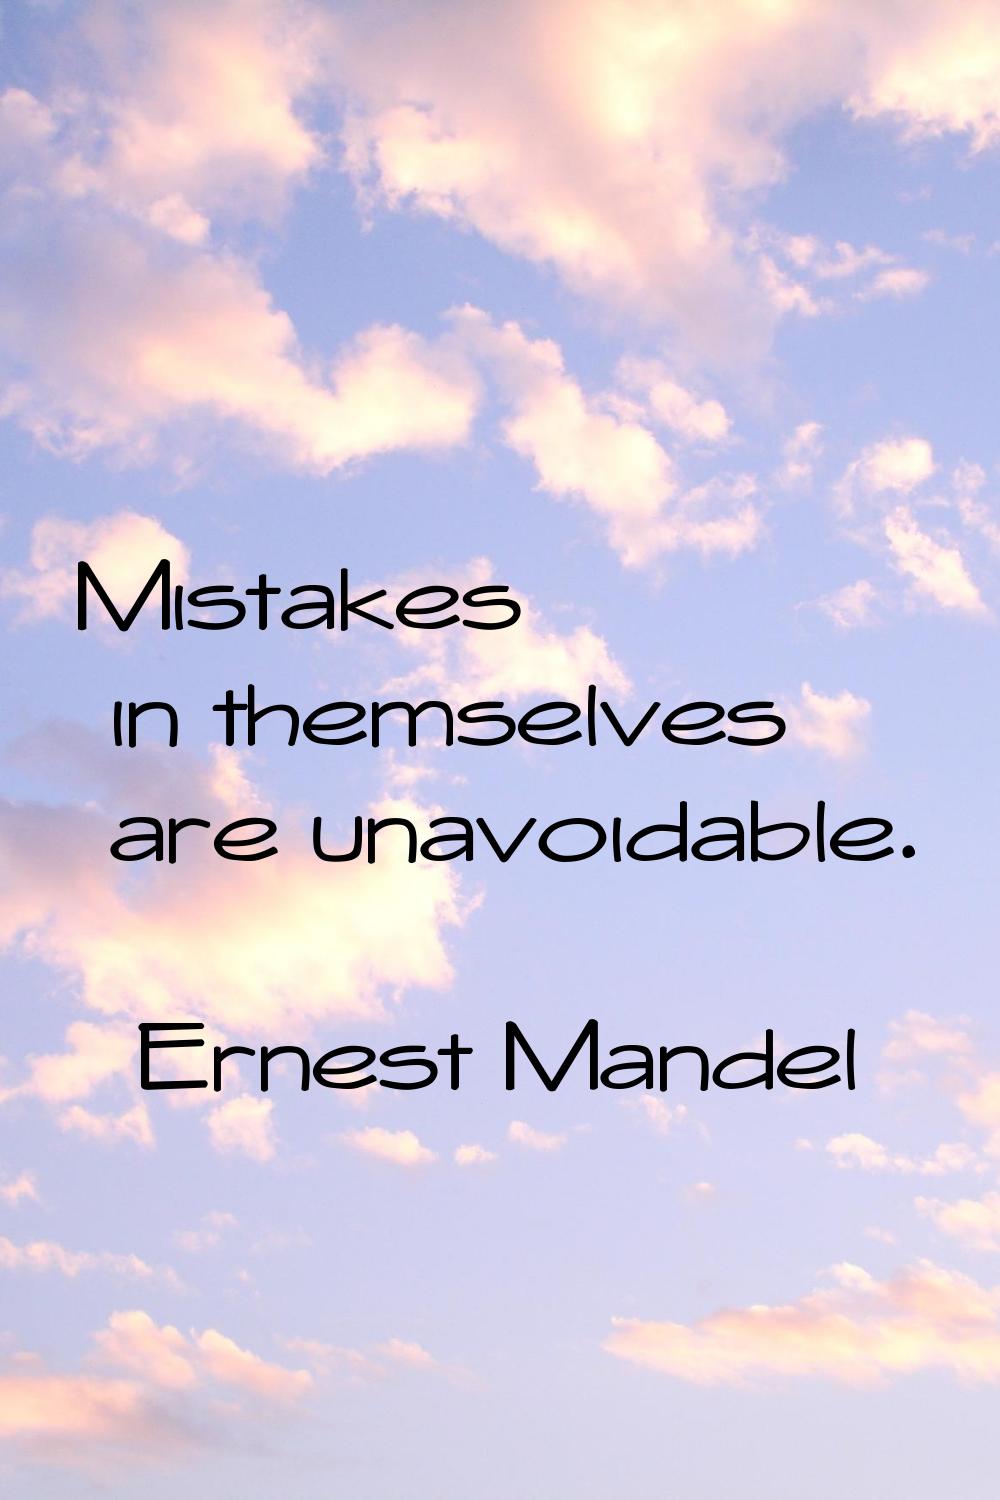 Mistakes in themselves are unavoidable.